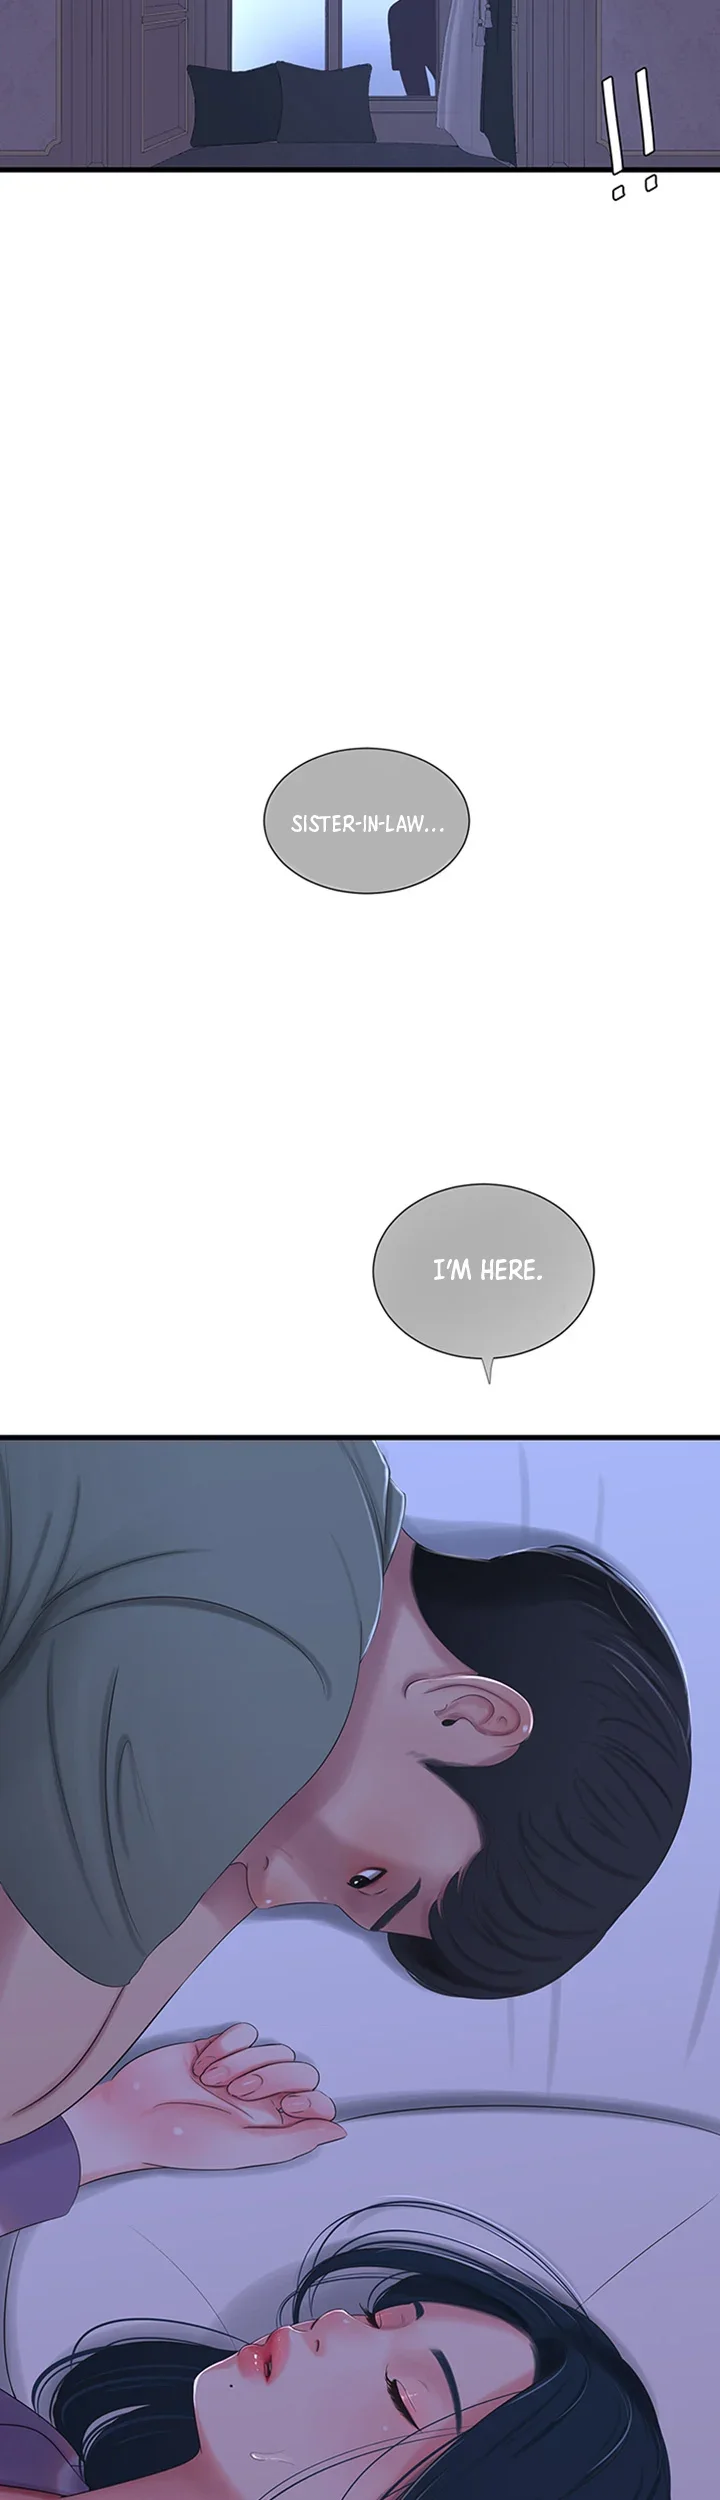 maidens-in-law-chap-30-34